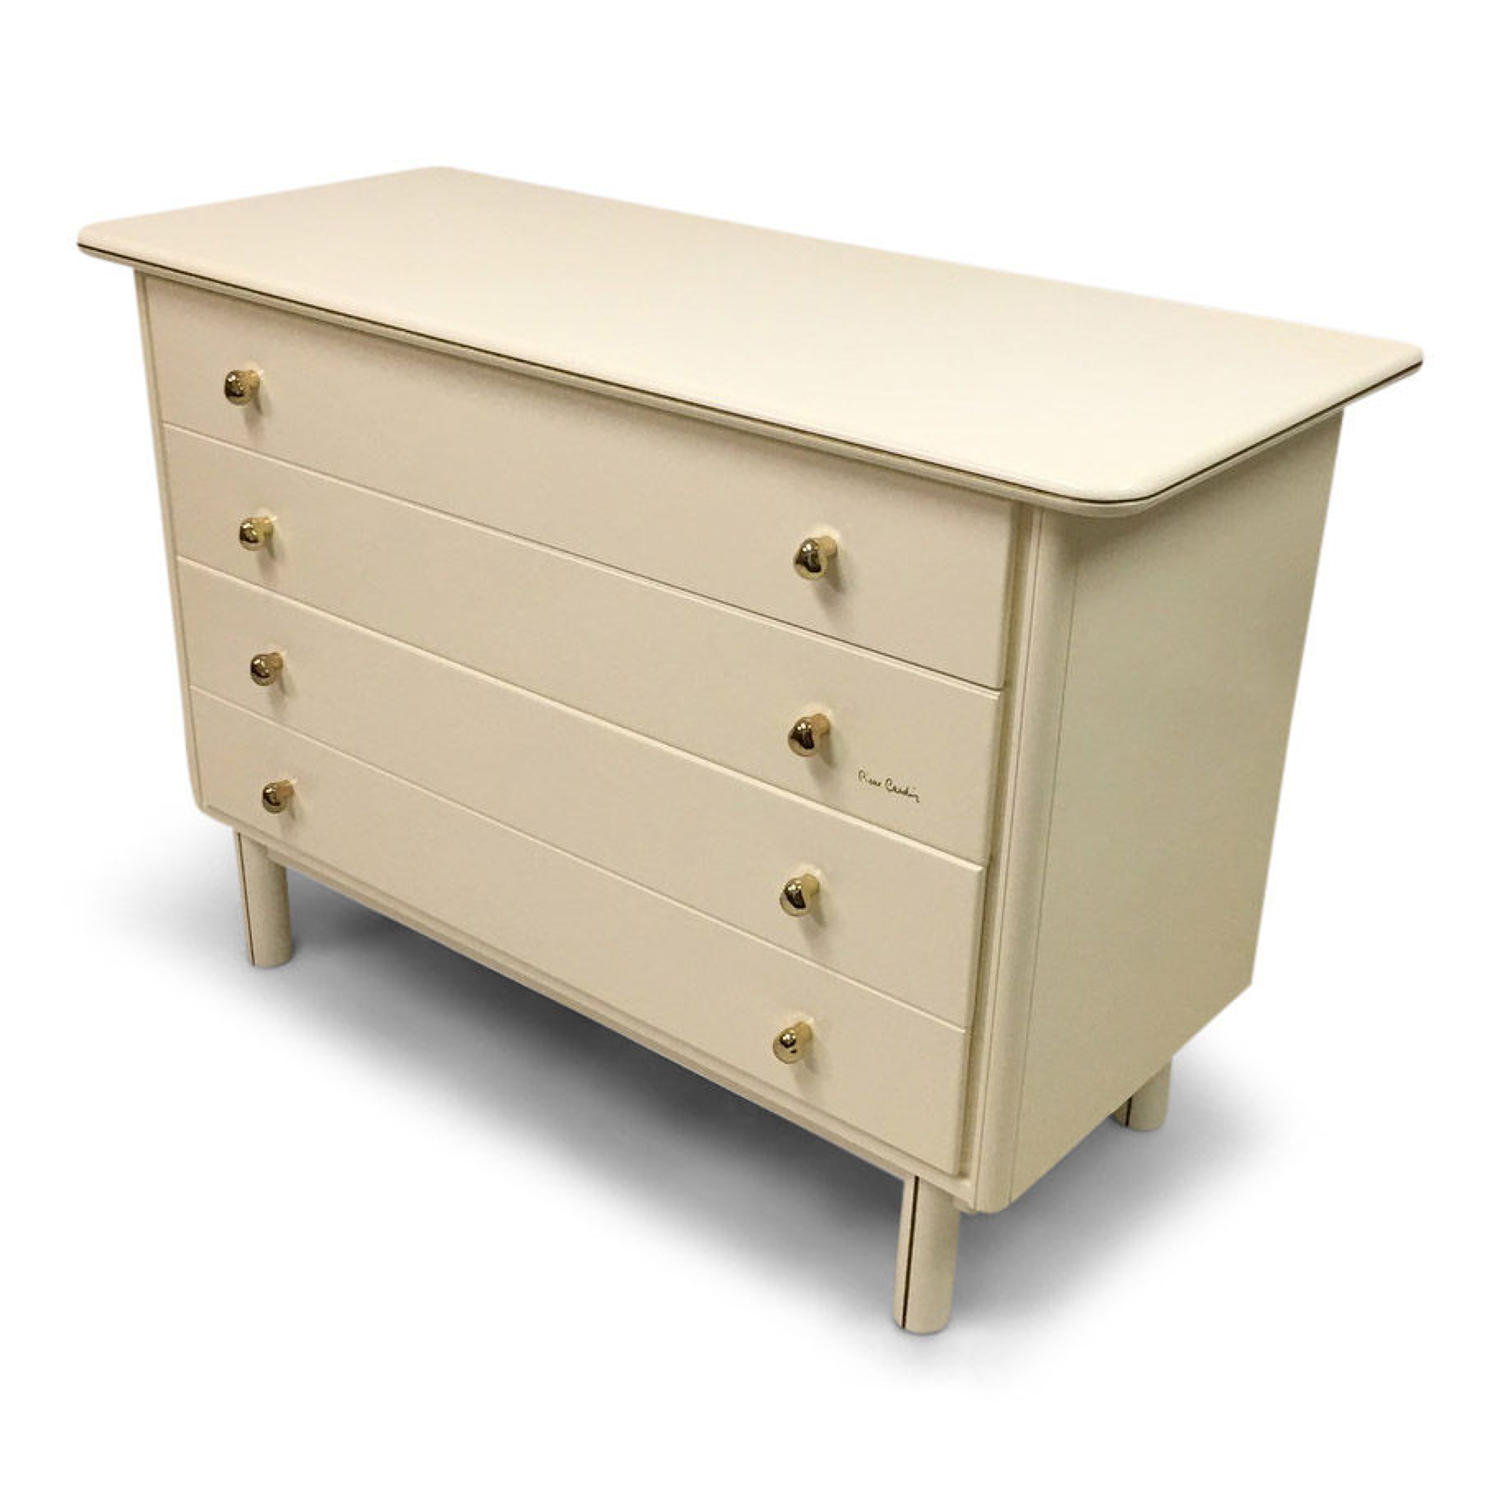 1980s chest of drawers by Pierre Cardin